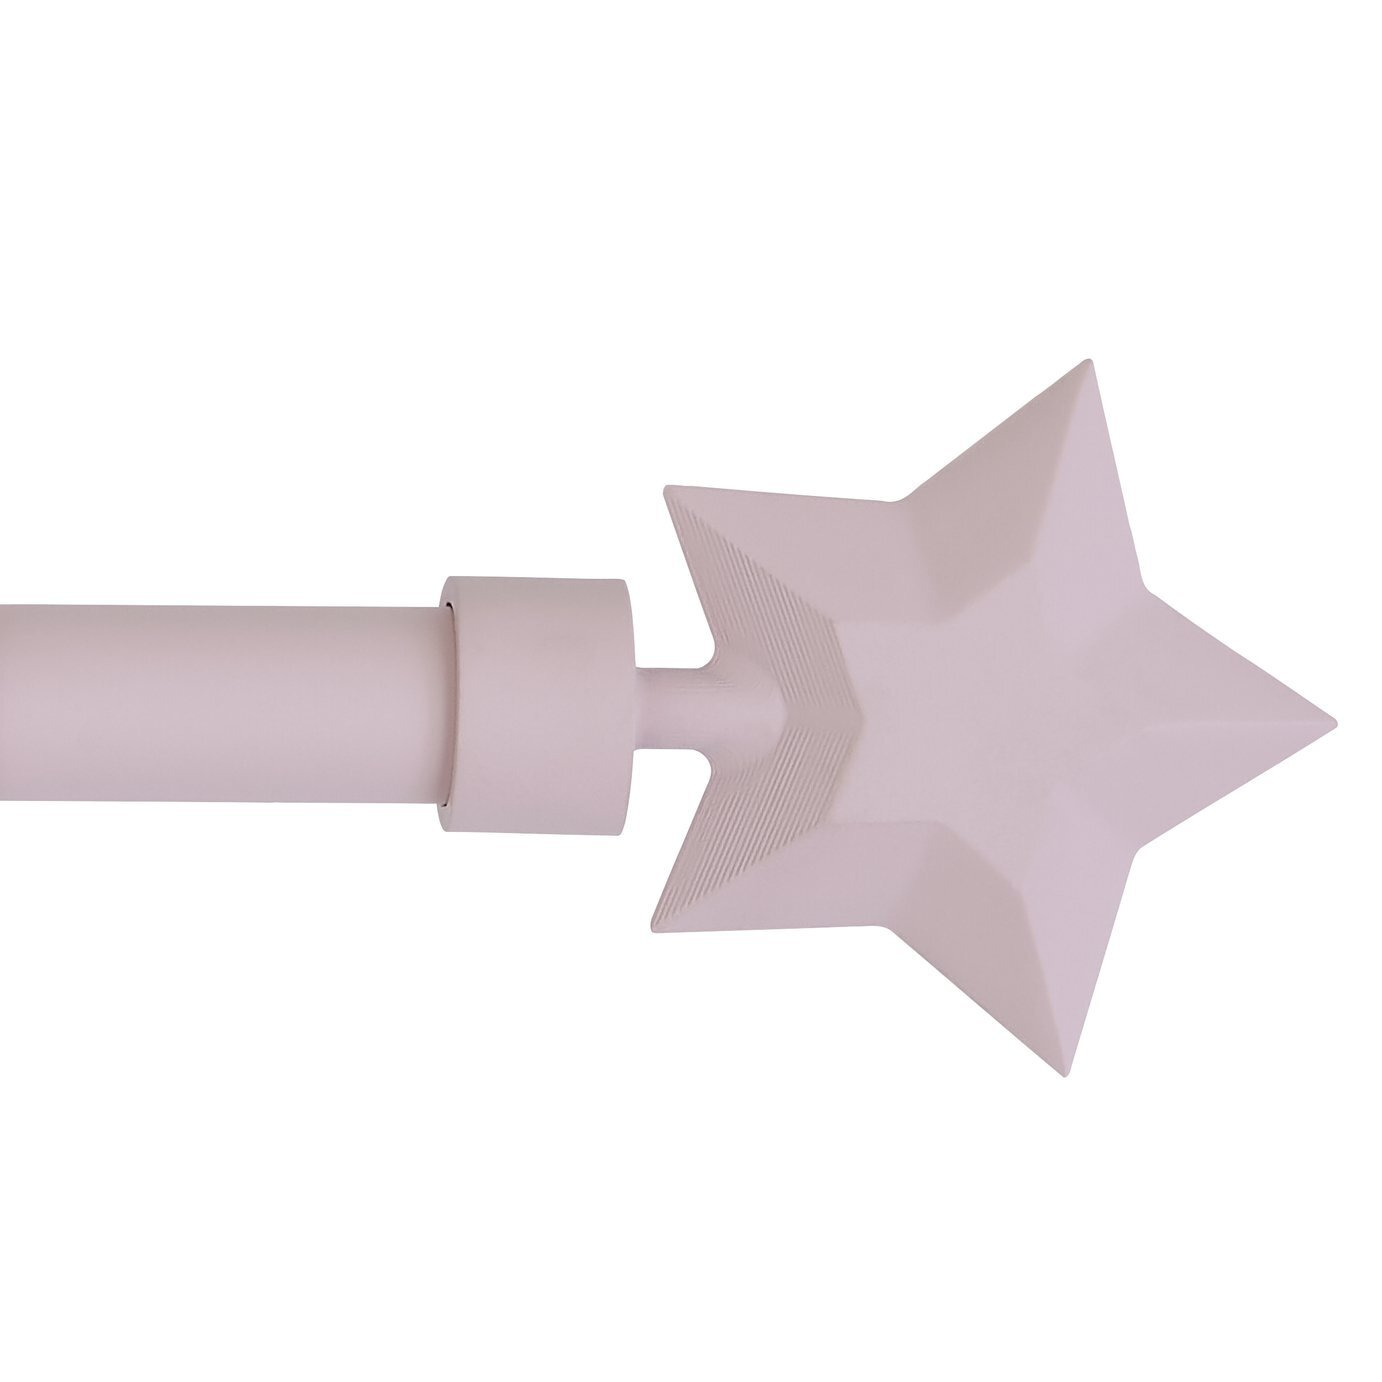 Argos Home Star 120-210cm Extendable Curtain Pole - Pink - image 1